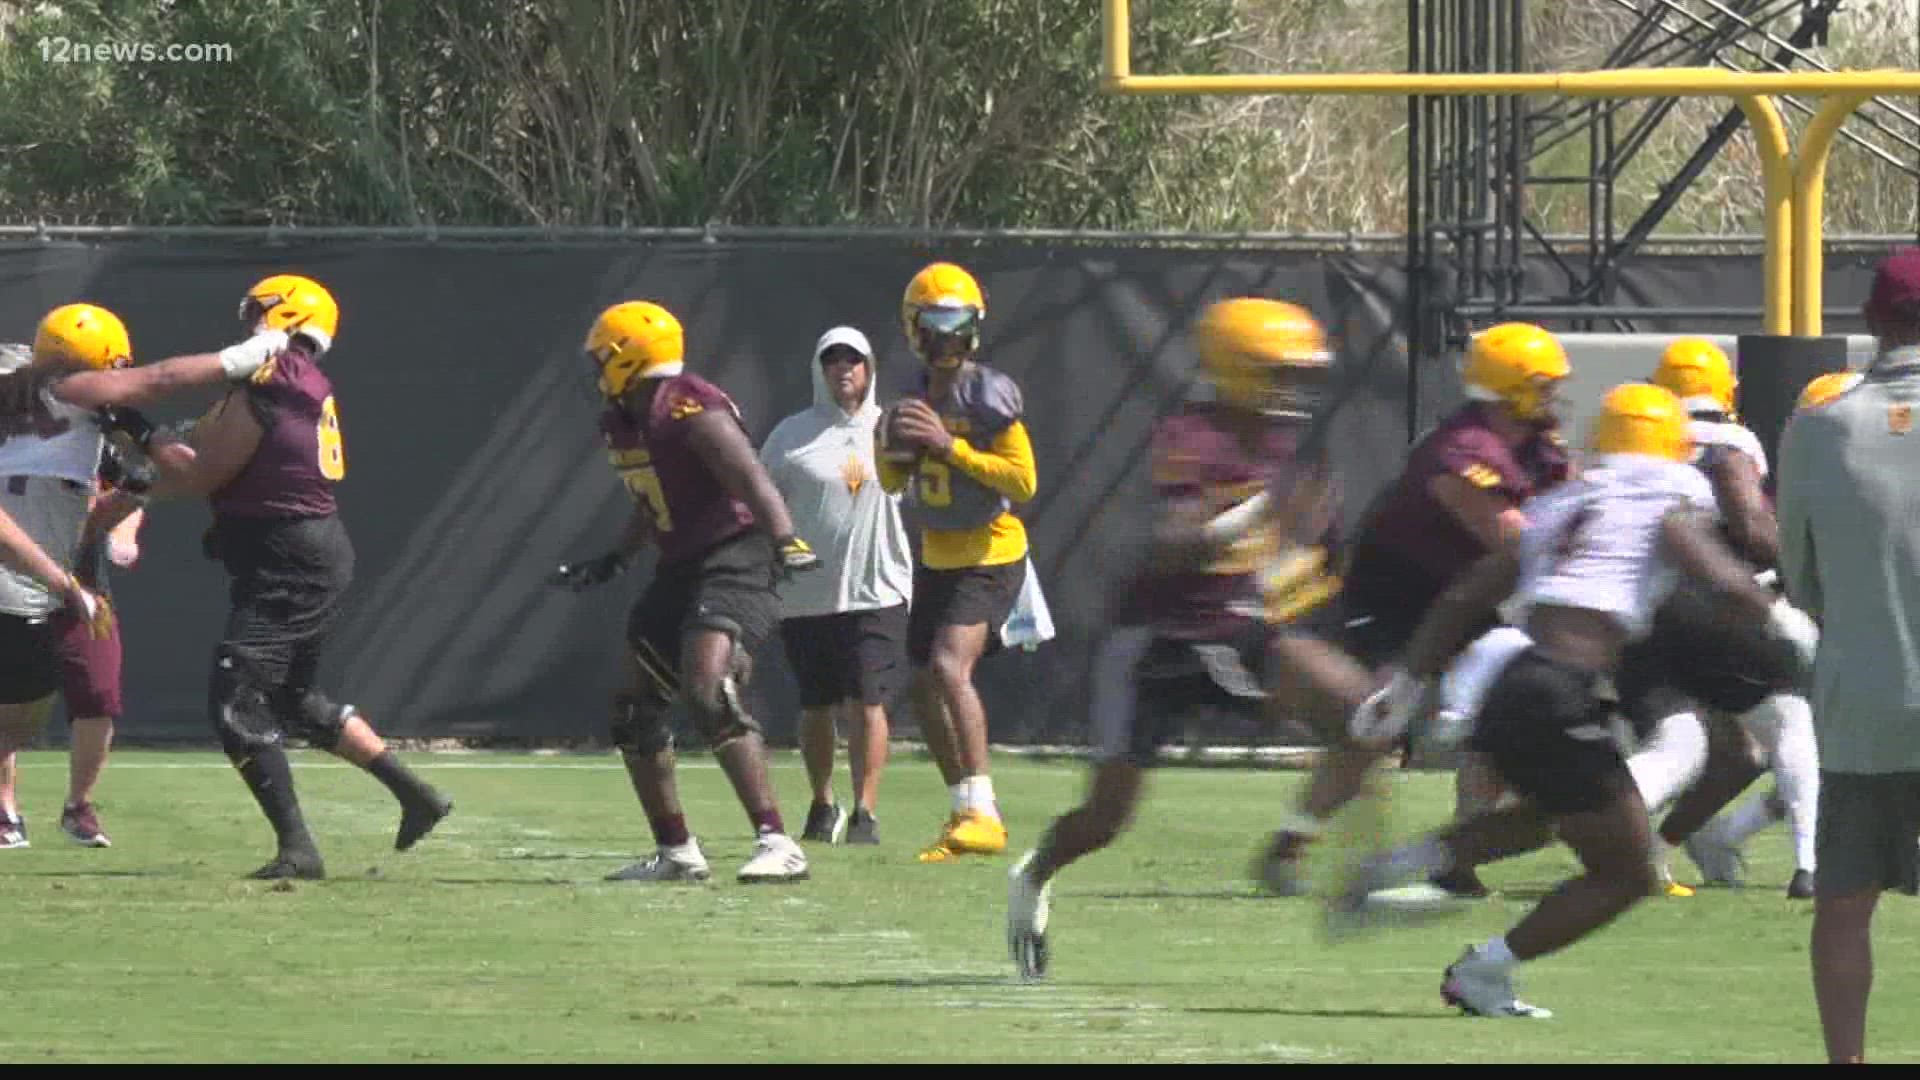 ASU football continues their practices as they prep for the college football season opener in September. We have the latest updates from practice.